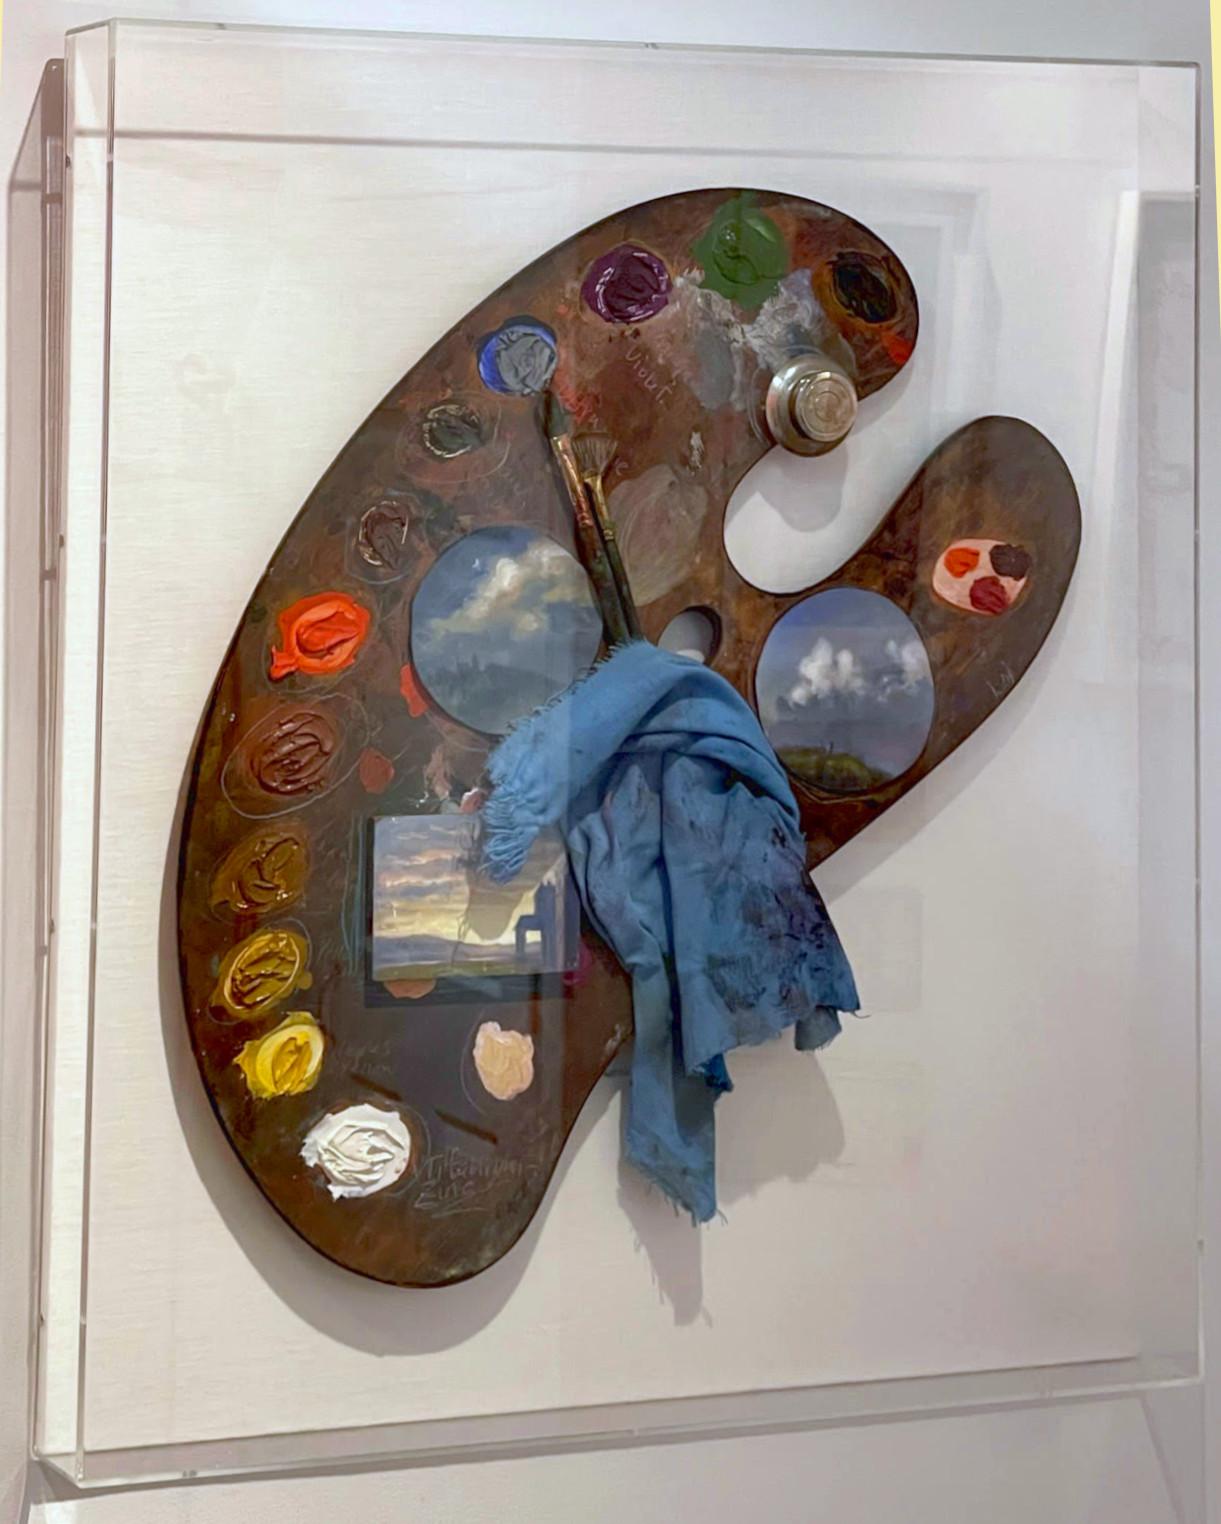 Artist's Palette - unique mixed media work (from the Estate of Met Museum EVP) - Brown Figurative Sculpture by Jane Hammond